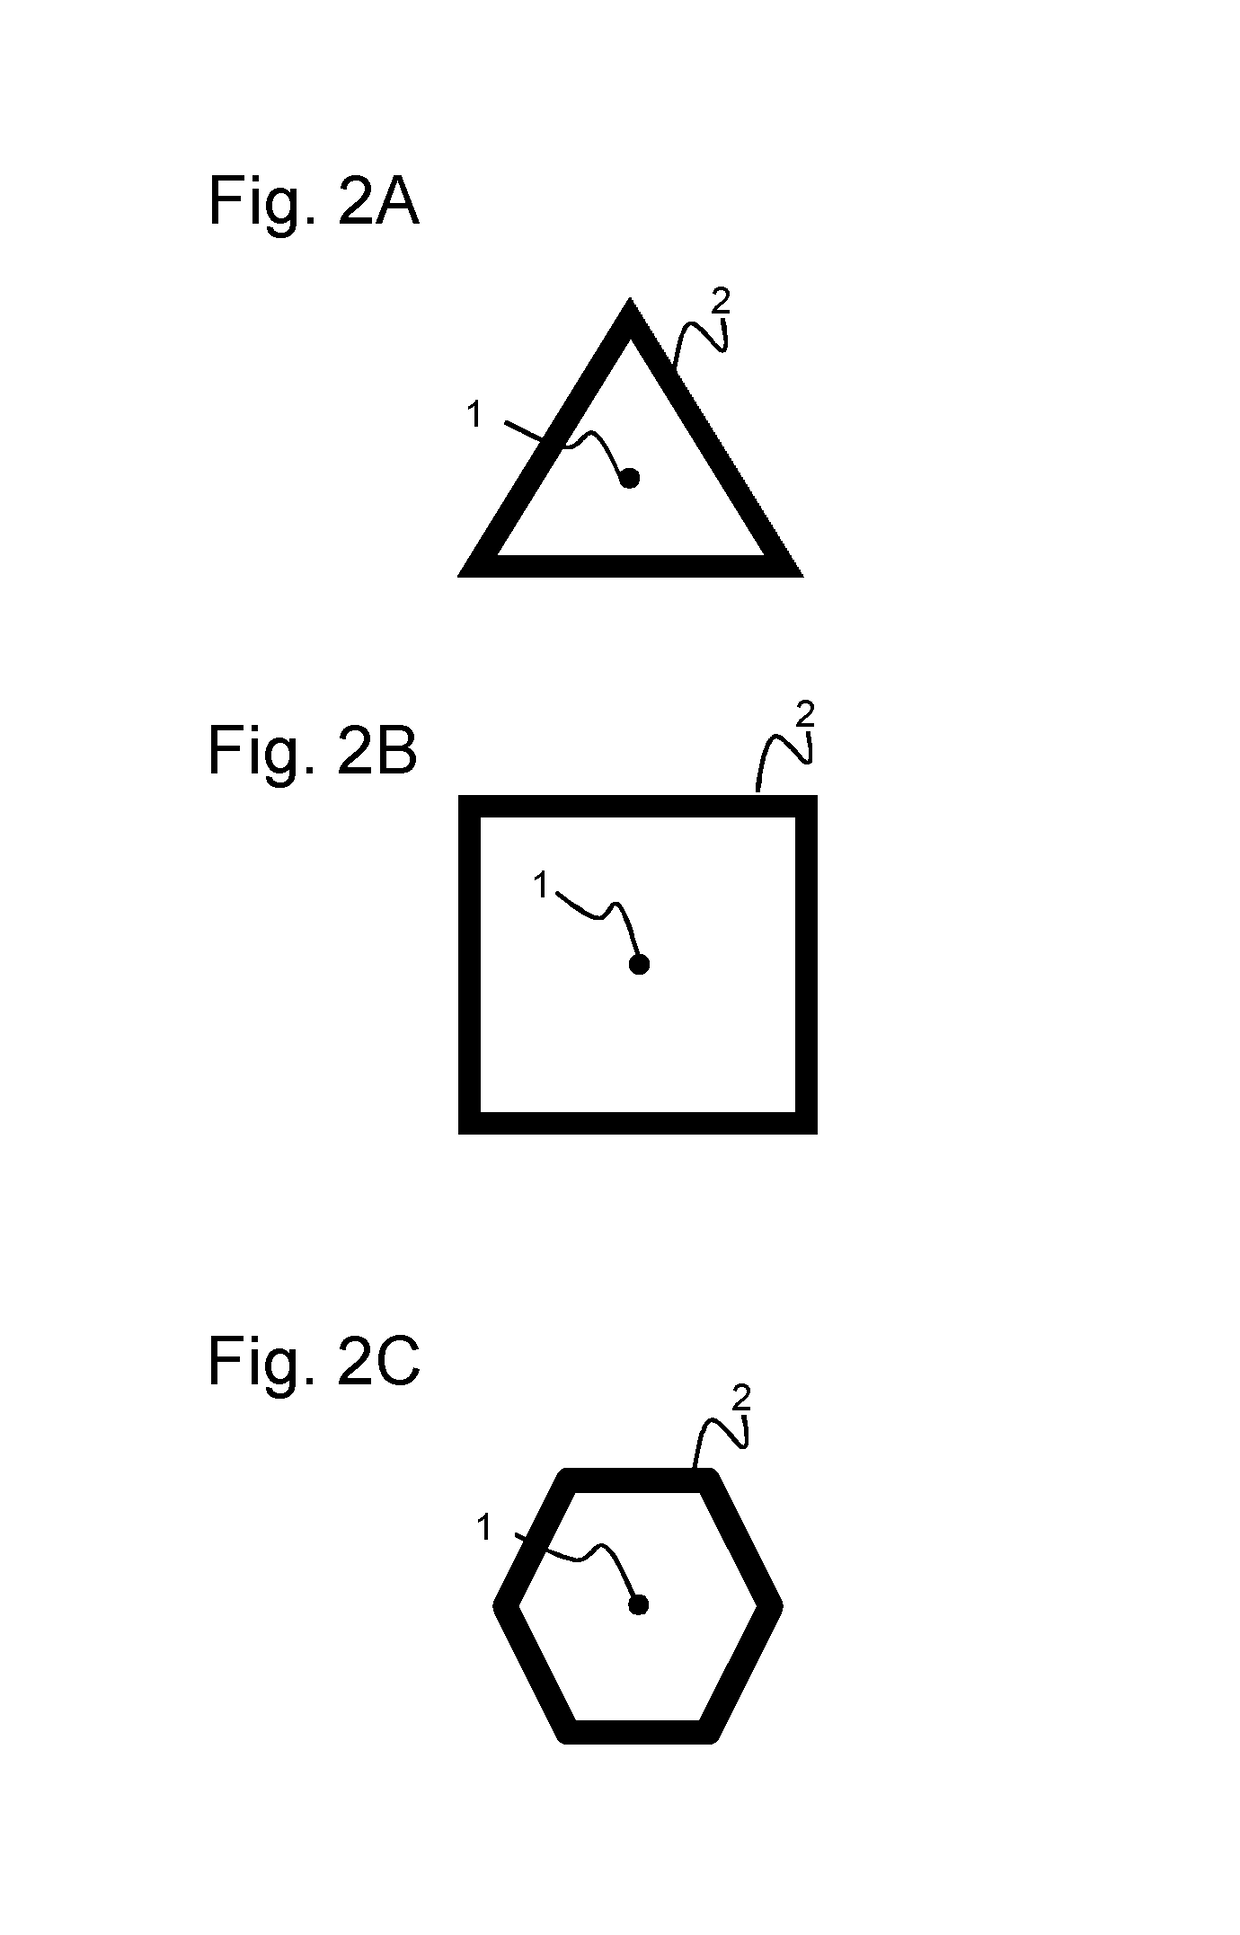 Centrosymmetric radio frequency electrode configuration for skin treatment